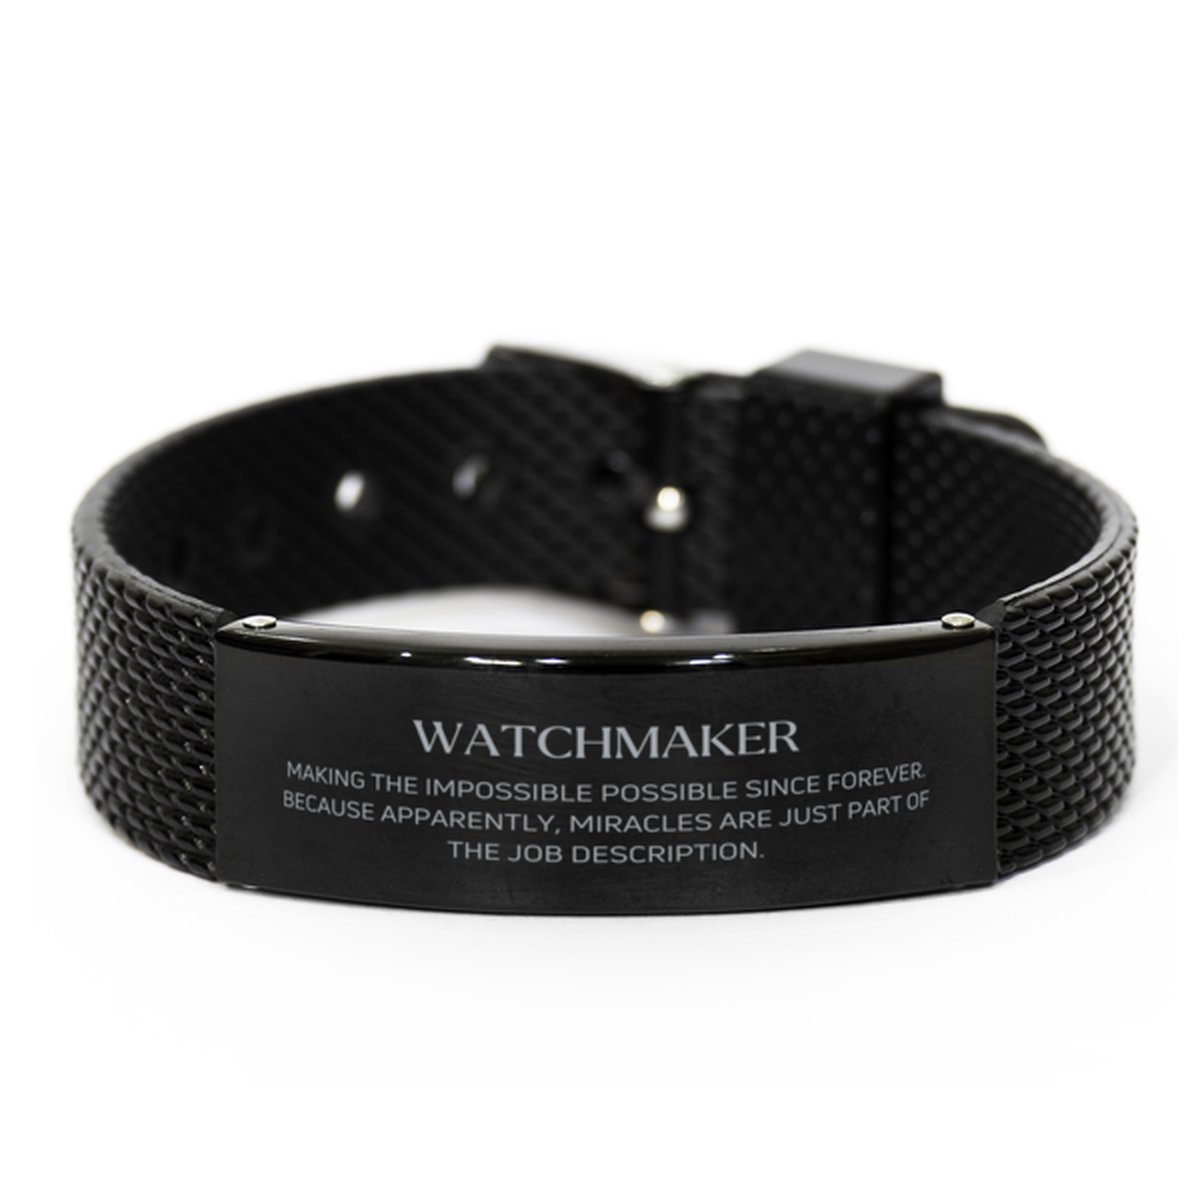 Funny Watchmaker Gifts, Miracles are just part of the job description, Inspirational Birthday Black Shark Mesh Bracelet For Watchmaker, Men, Women, Coworkers, Friends, Boss